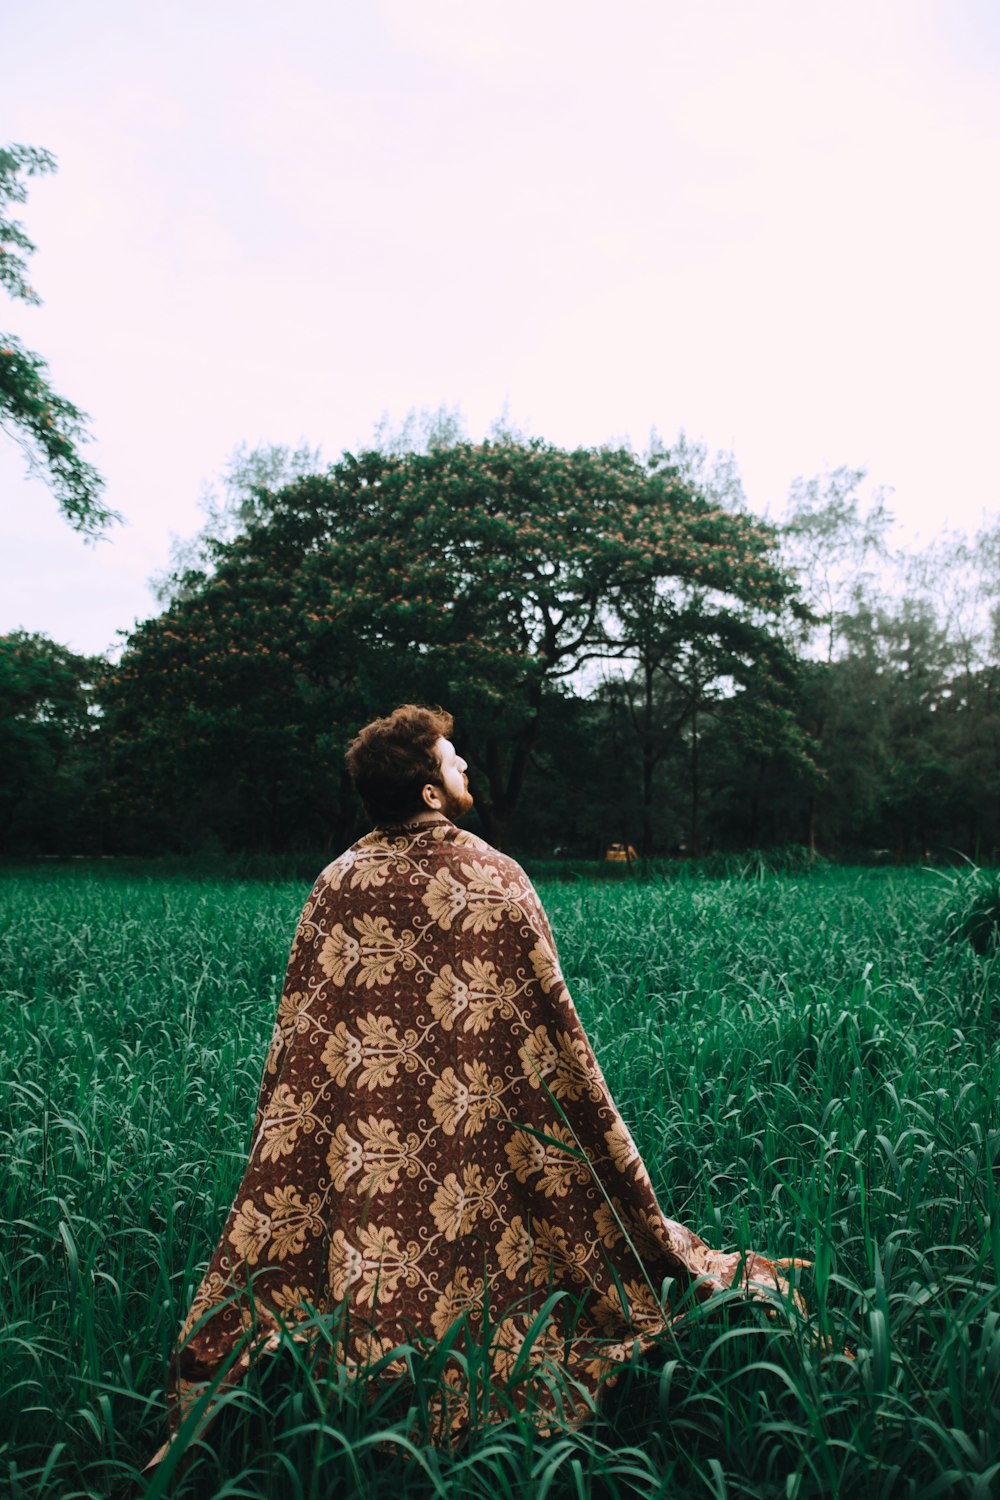 man wearing brown floral robe surrounded by grass